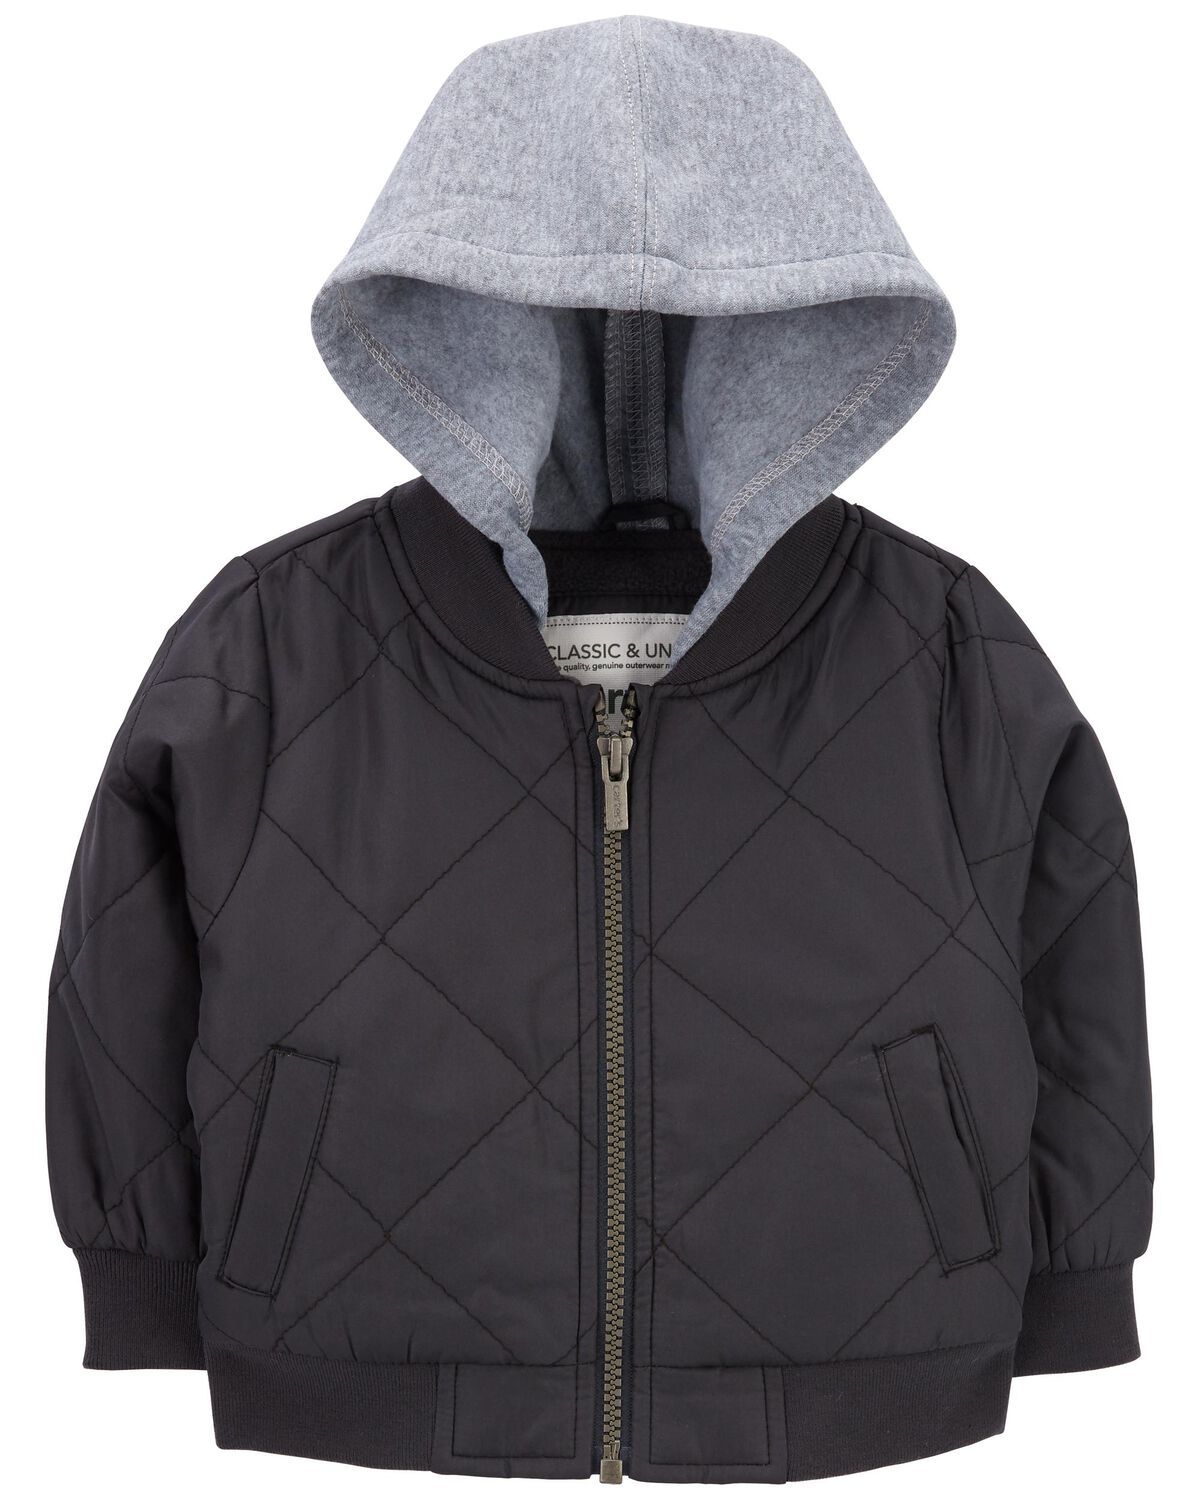 Black Baby Hooded Quilted Bomber | carters.com | Carter's